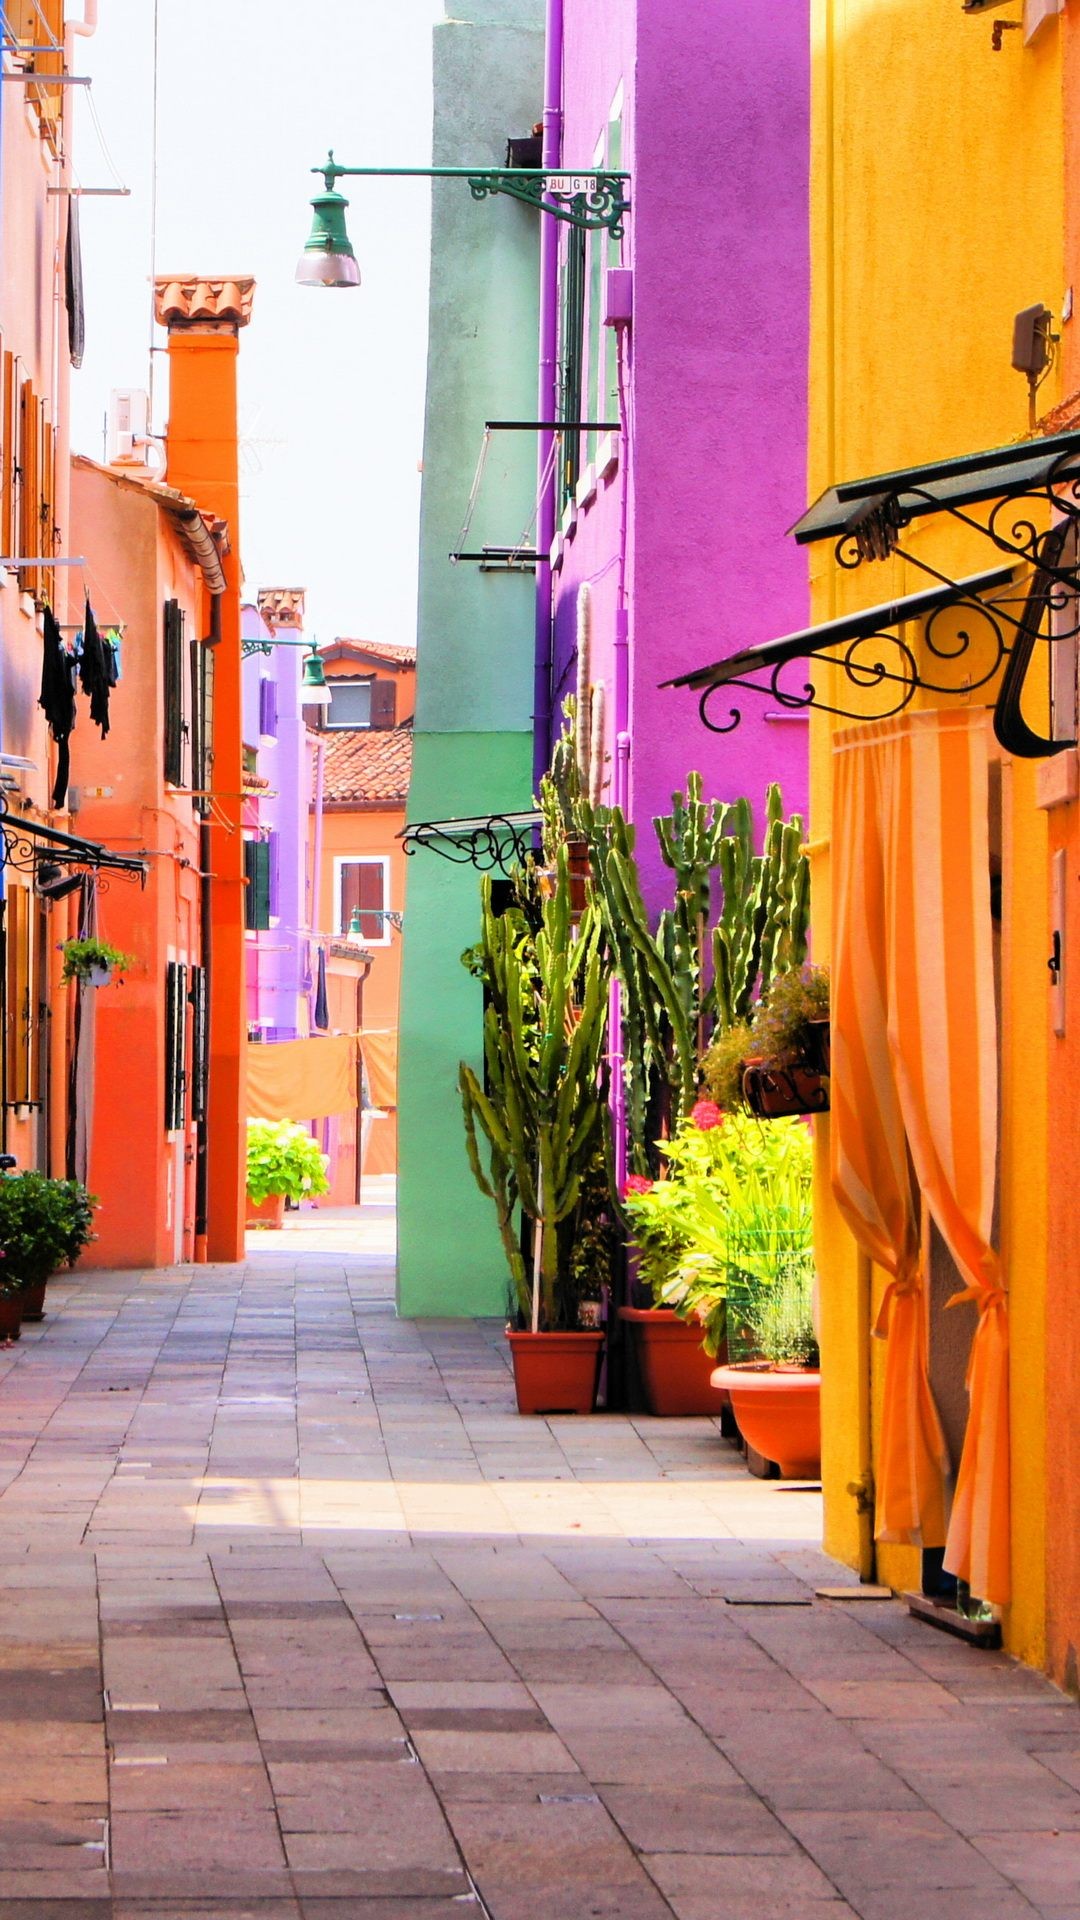 Italy Colorful Streets - HD Wallpaper 